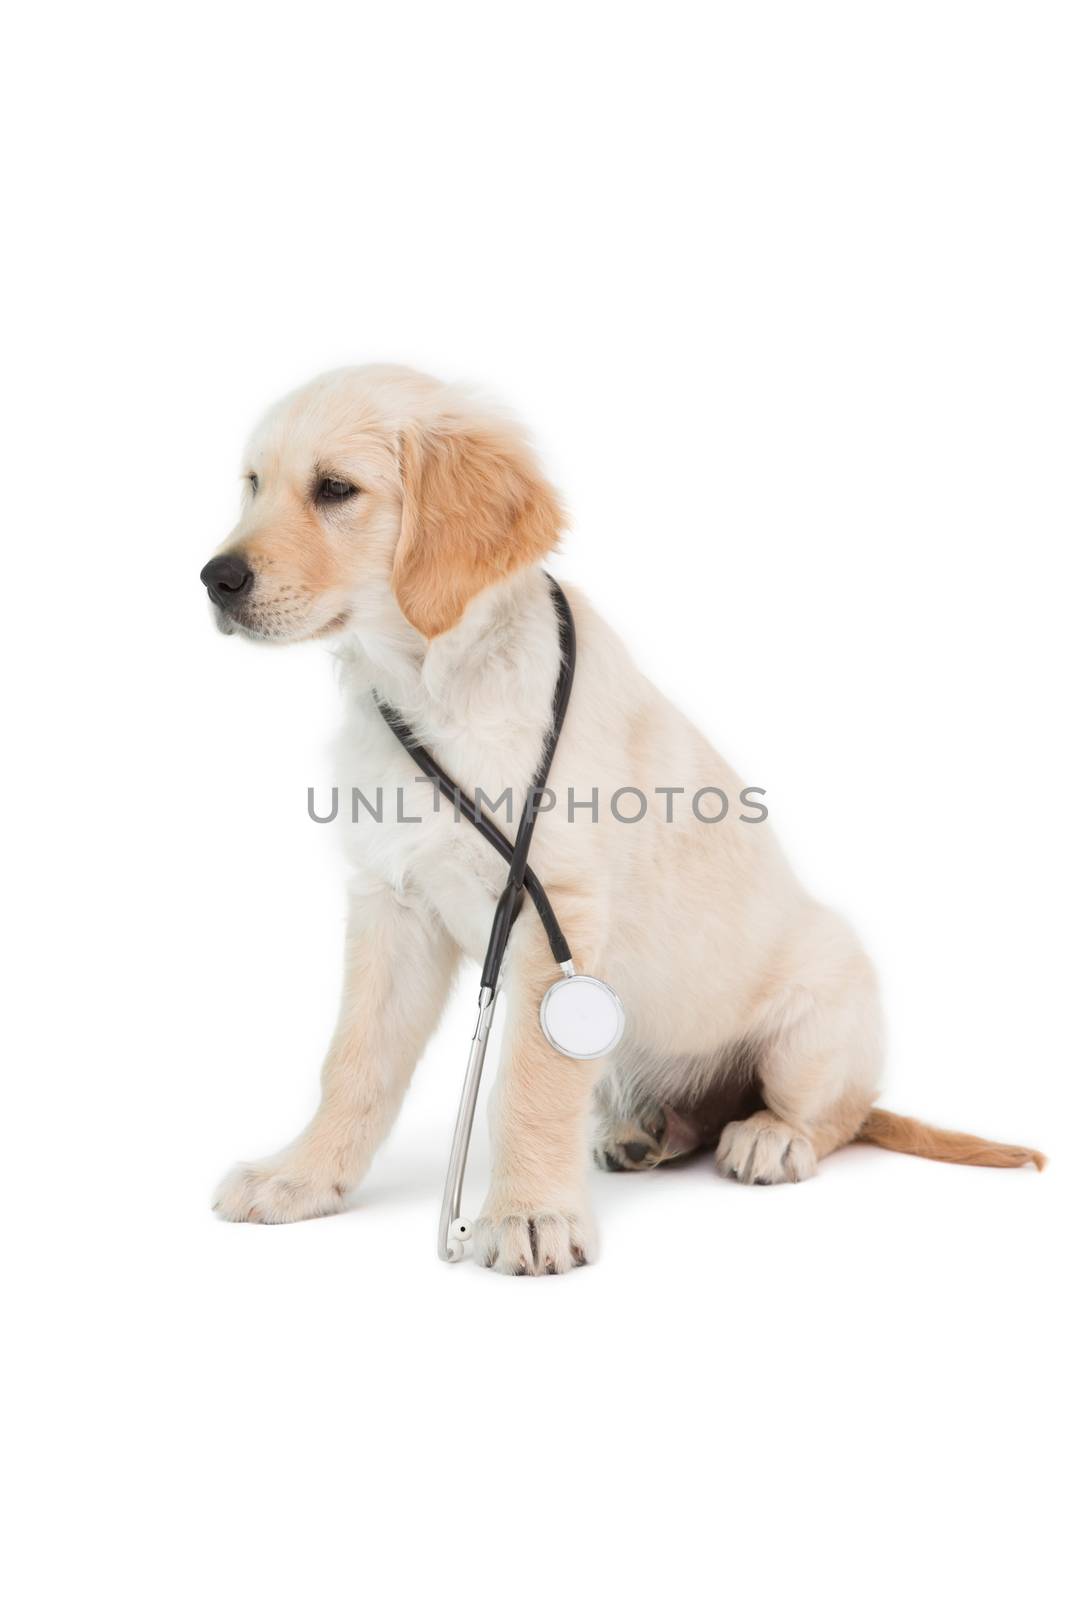 Sitting dog looking to the side on white background 